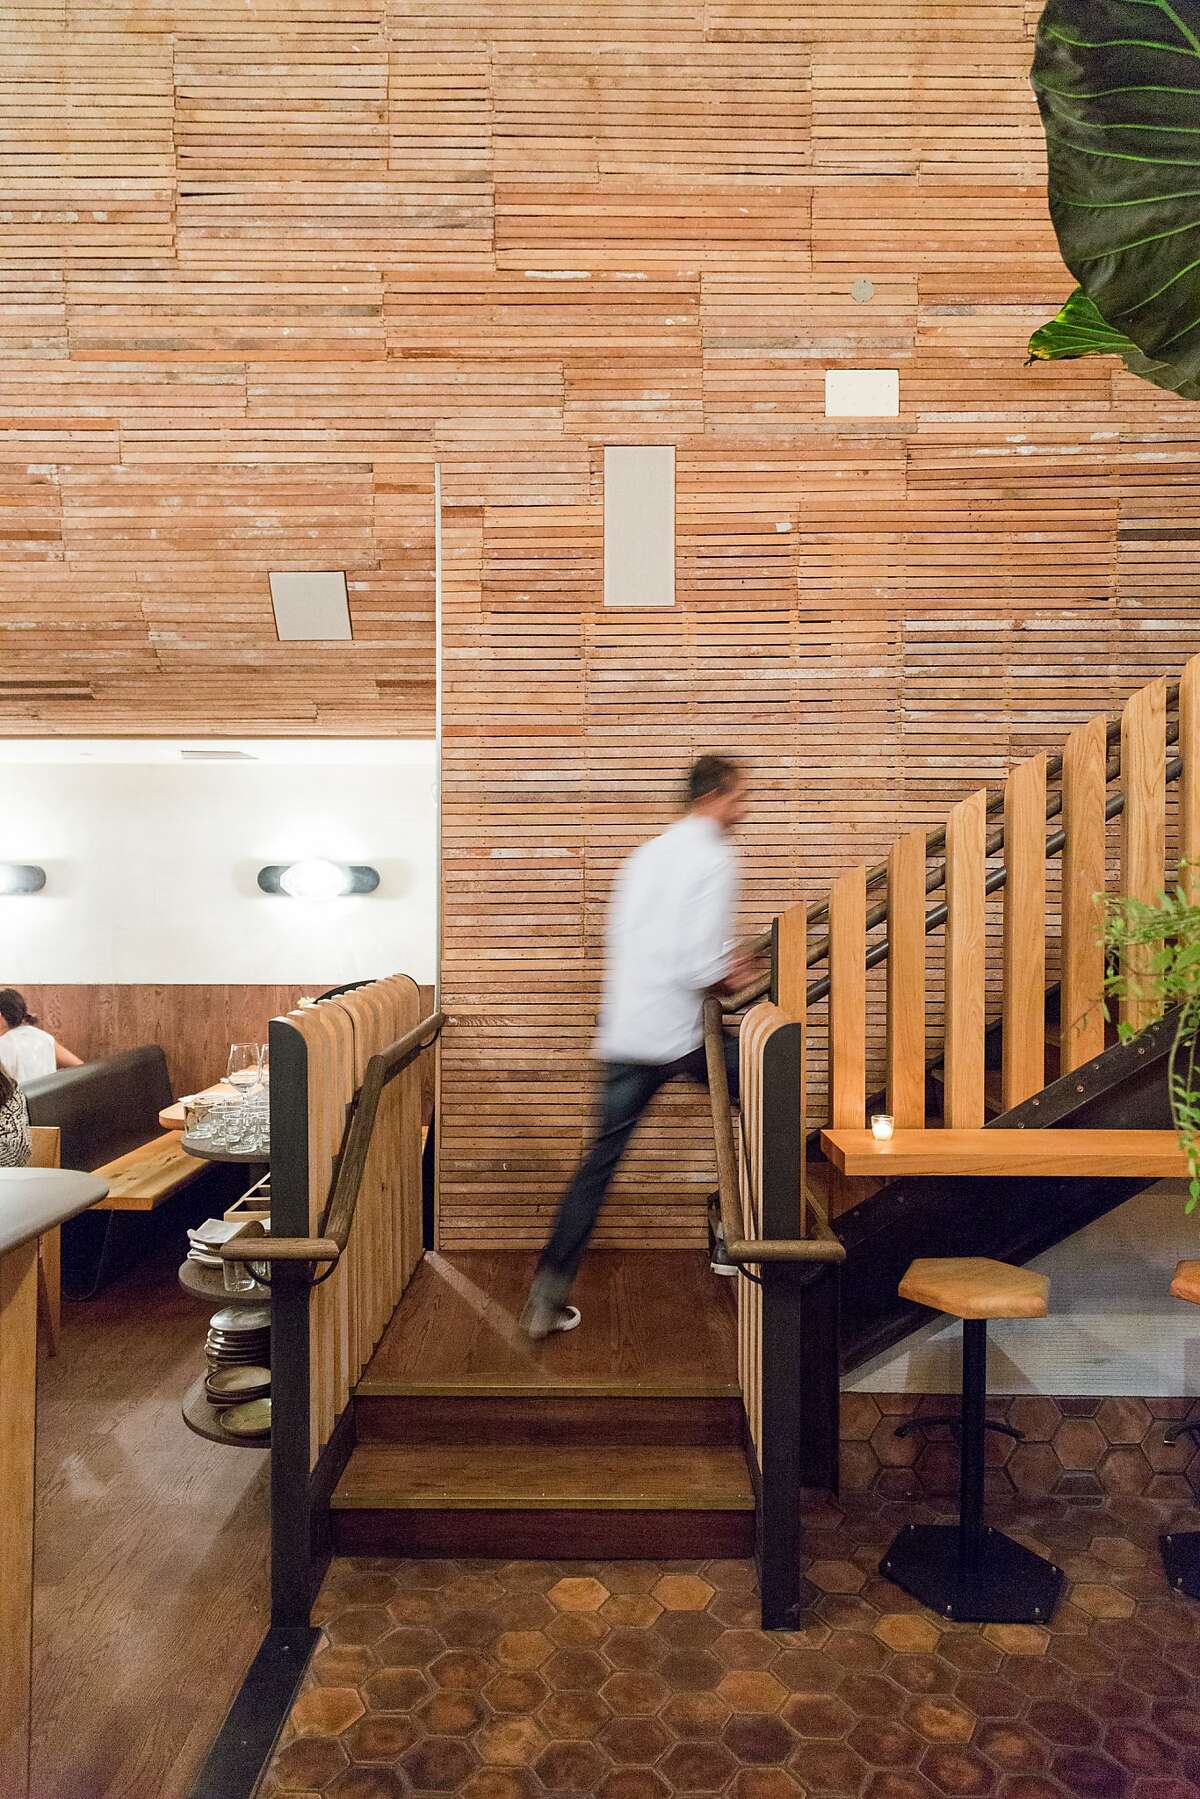 The original plaster was removed from the wood-slat walls exposing the architecture of the building at The Progress restaurant in San Francisco, Calif., Wednesday, February 4, 2015.